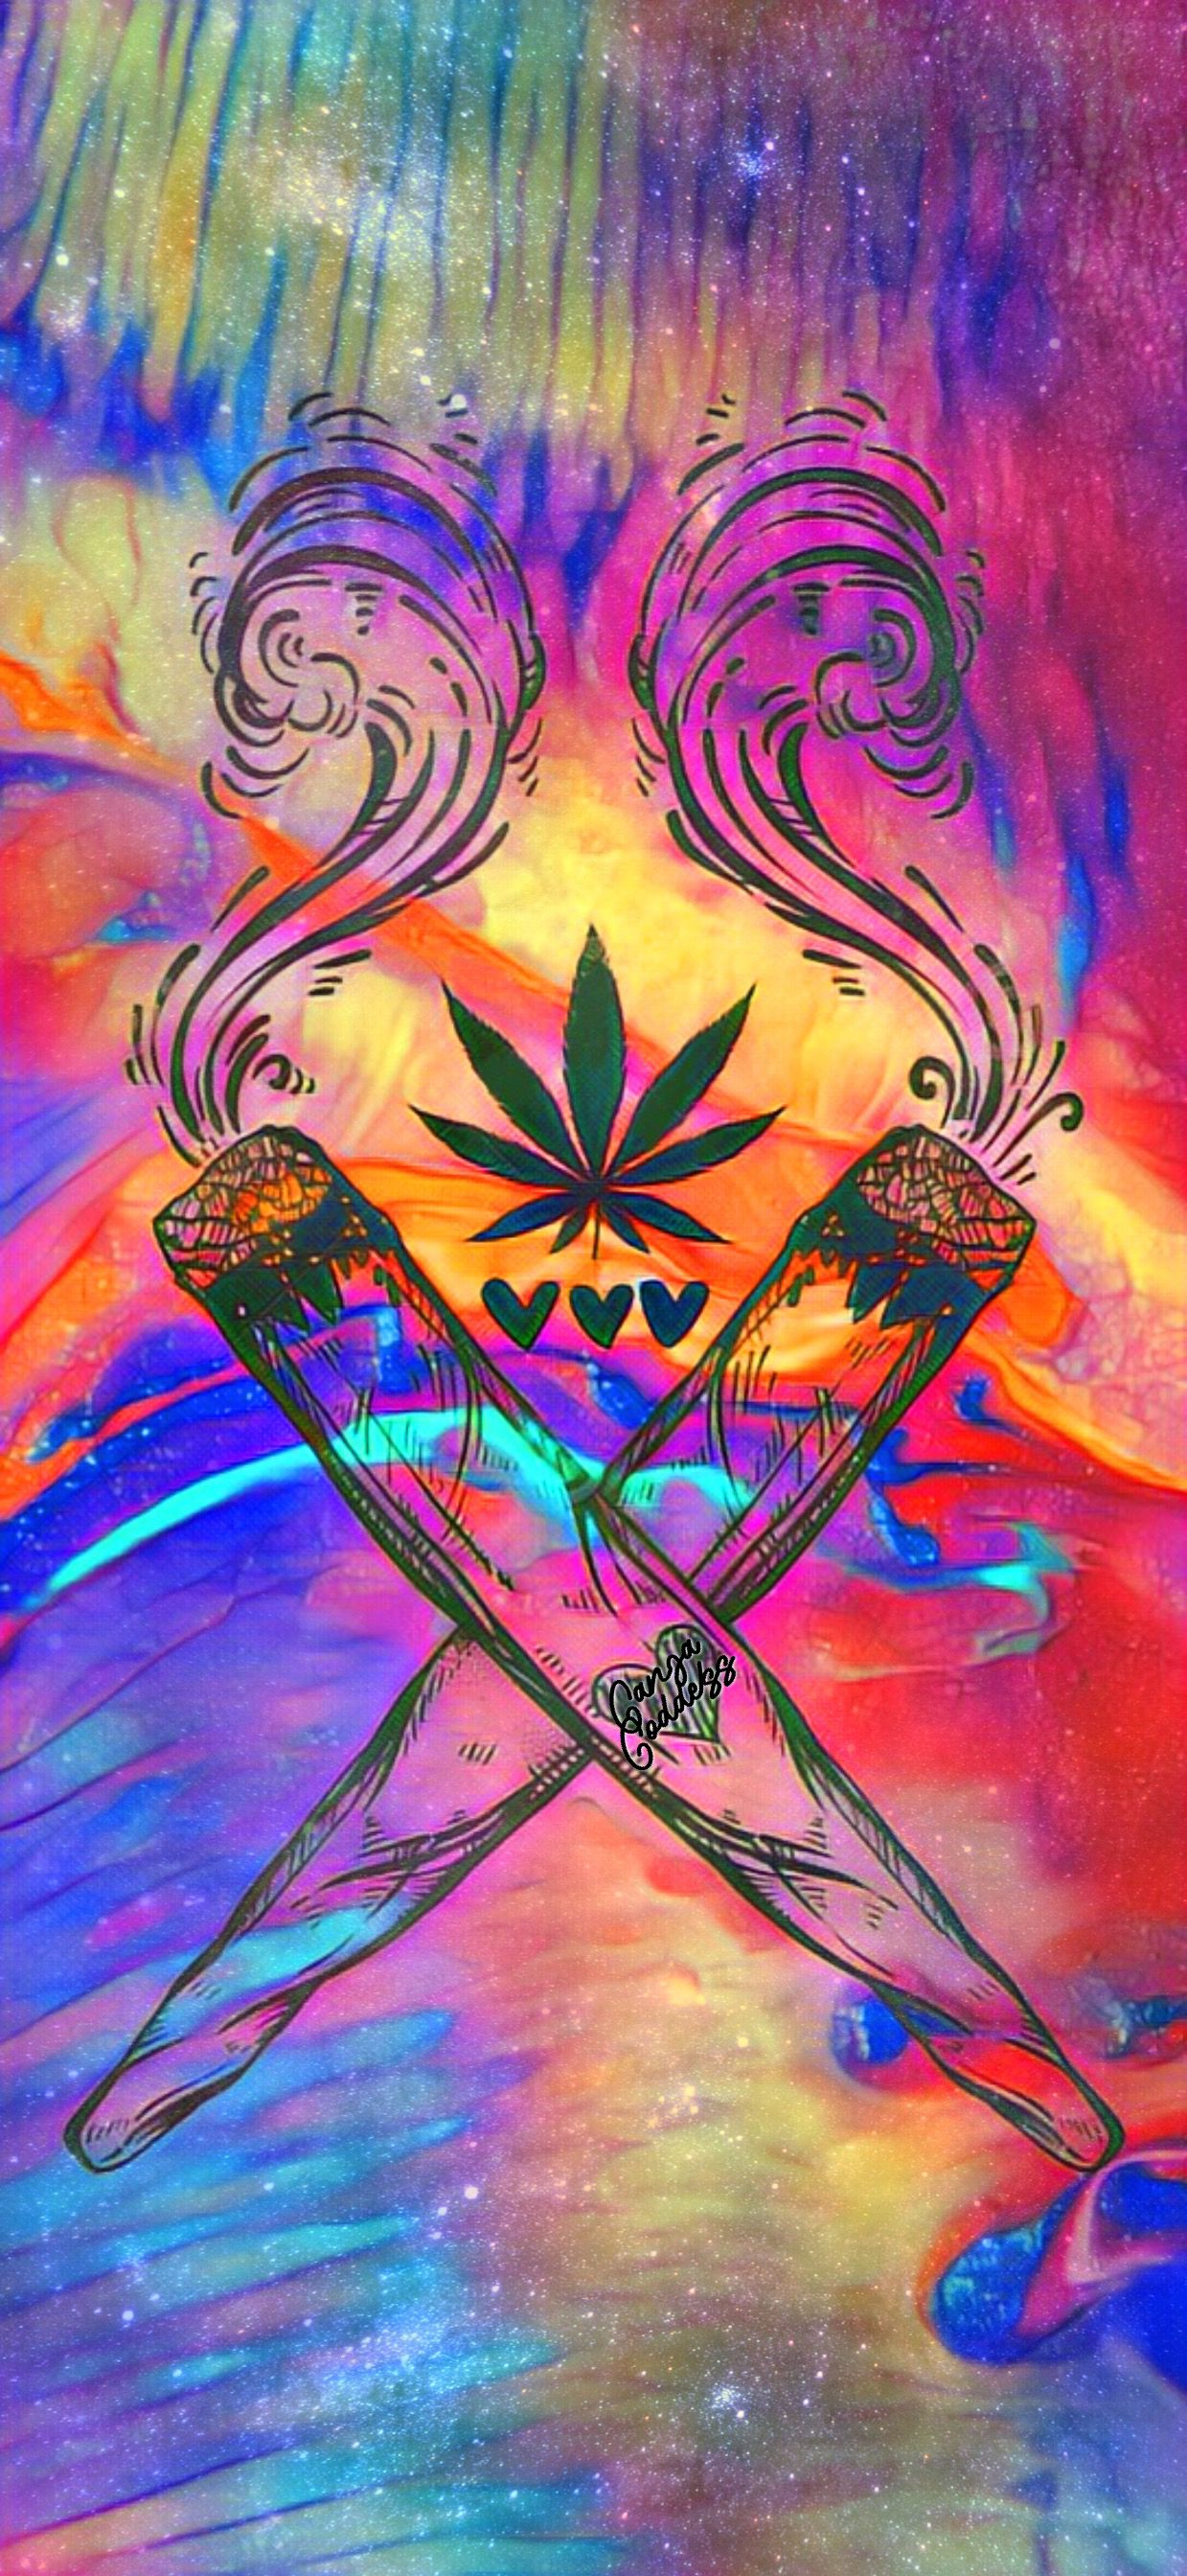 A colorful background with a cannabis leaf in the middle - Weed